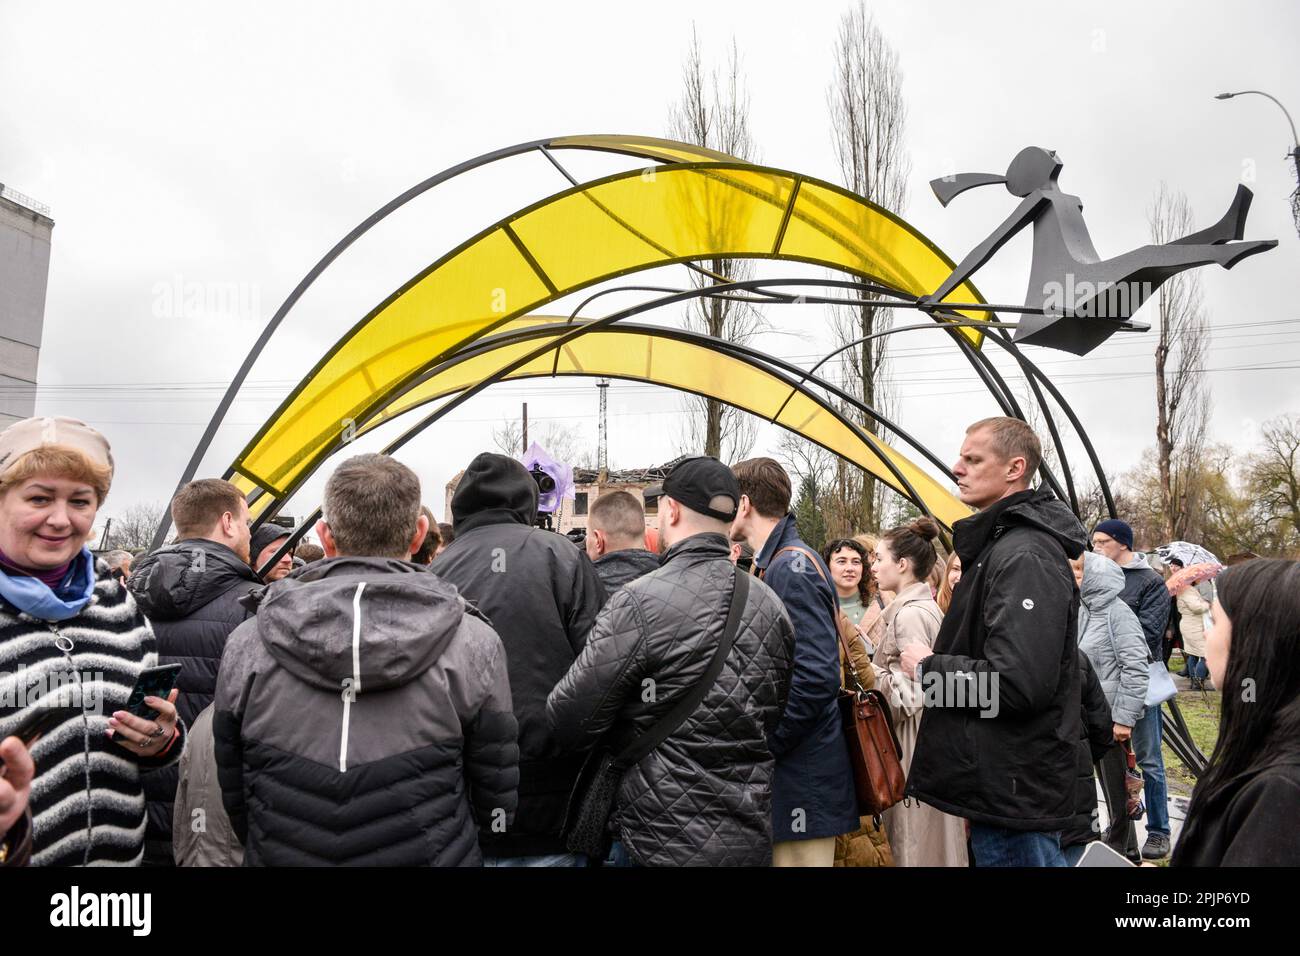 People look at the sculpture 'Girl under the sun' in Borodyanka. The sculpture 'Girl under the sun' was opened in Borordyanka in honor of the anniversary of the de-occupation of Kyiv region. The four-meter sculpture represents the victory of life over destruction, and its arches will symbolize the resistance of seven districts of Kyiv region and the capital. This is how the symbolic date was celebrated - a year ago, the Armed Forces of Ukraine completely liberated the Kyiv region from the Russian invaders. 'The sculpture reflects the powerful contrast of life and destruction that accompanied U Stock Photo